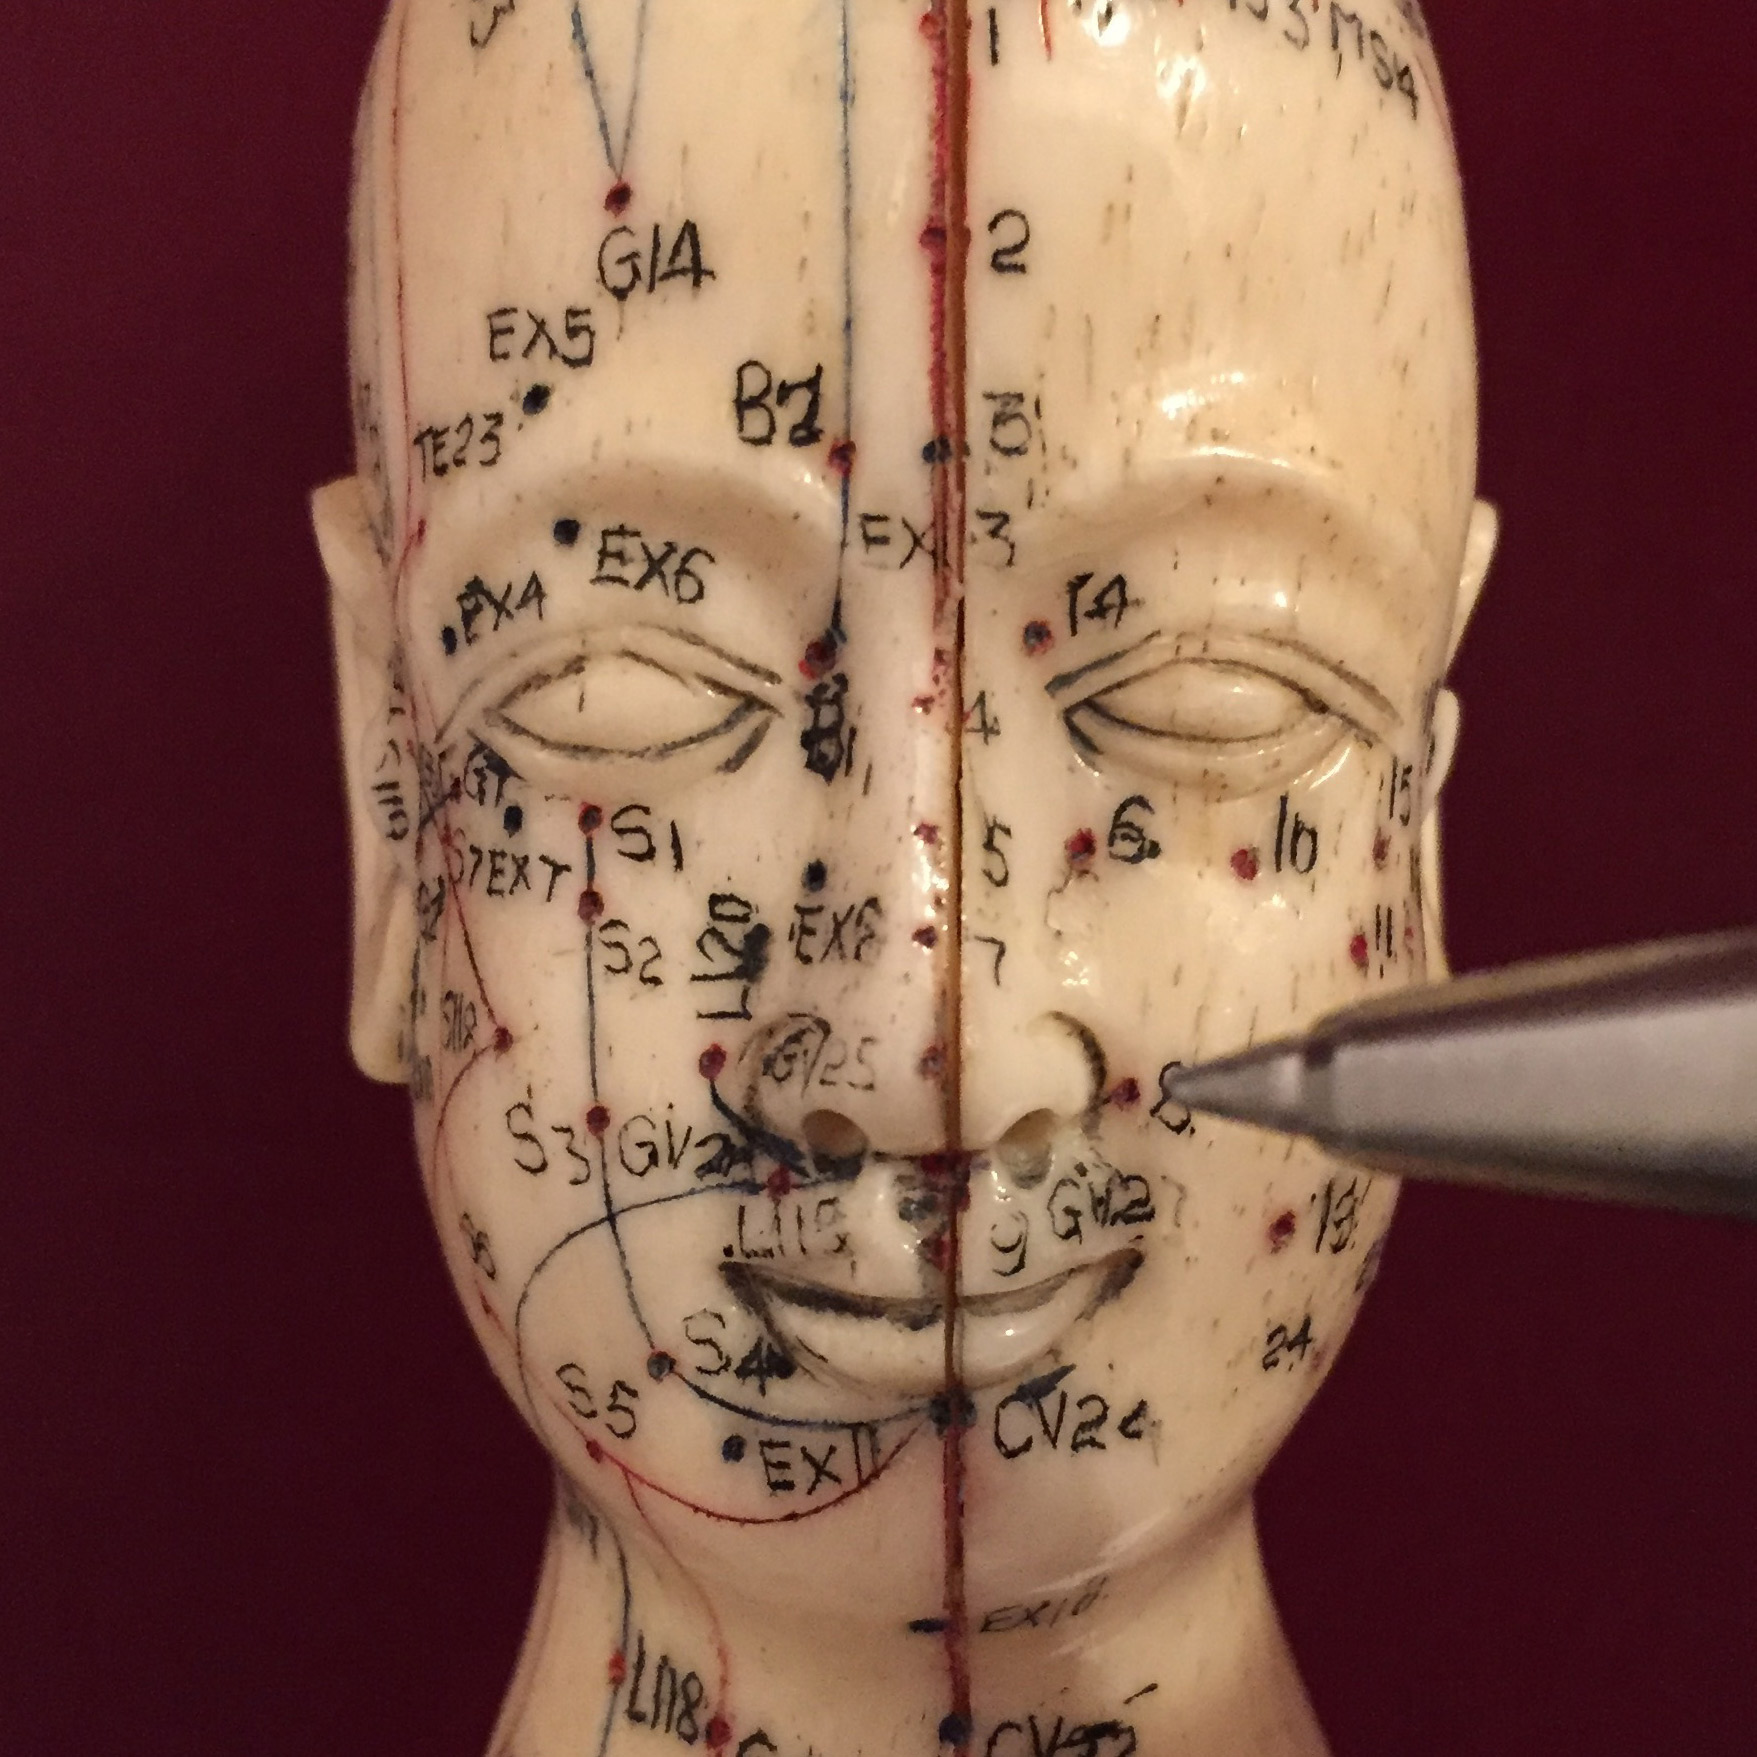 A photo of a statue showing acupuncture points